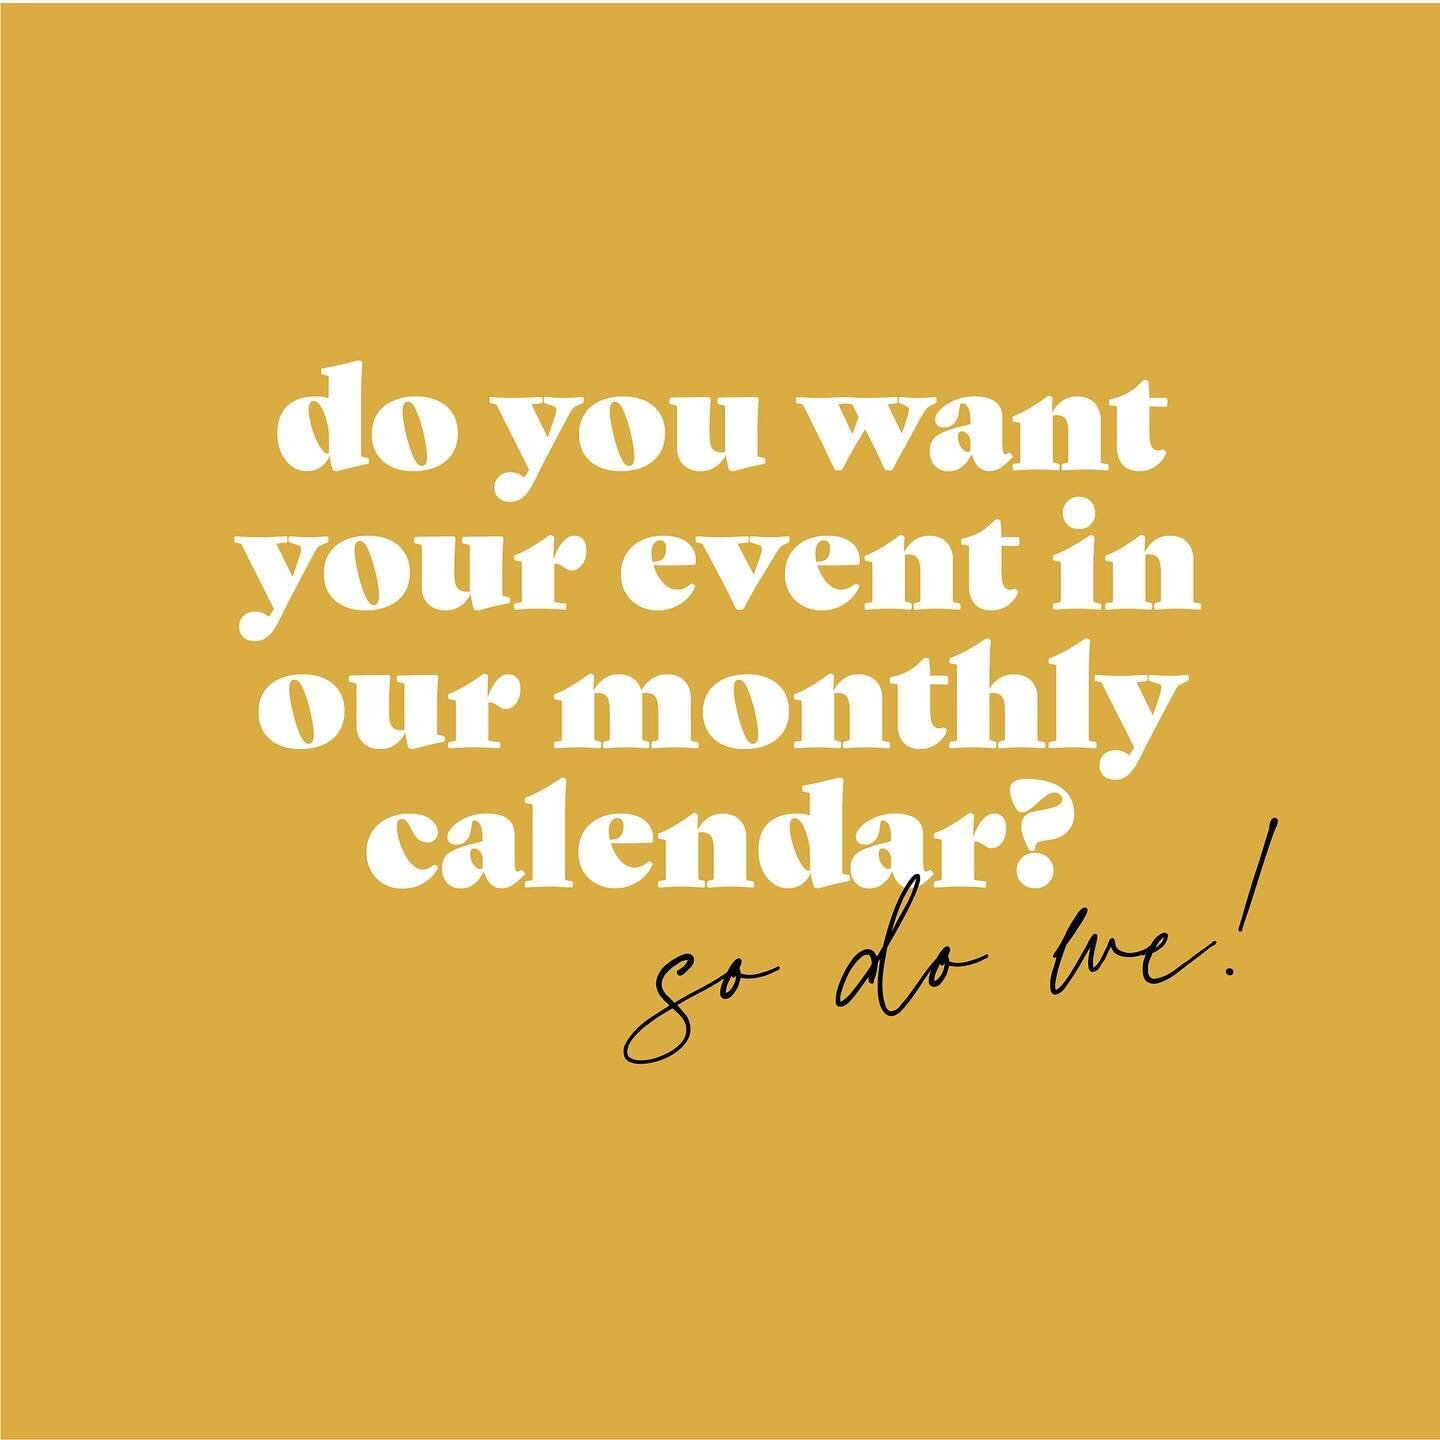 Attention NOCO (Northumberland County) business owners / event planners / public spaces! If you have an event, class, workshop, etc. we want to know about it. 

Head to the website and submit your events for May before April 15th to be featured in ou